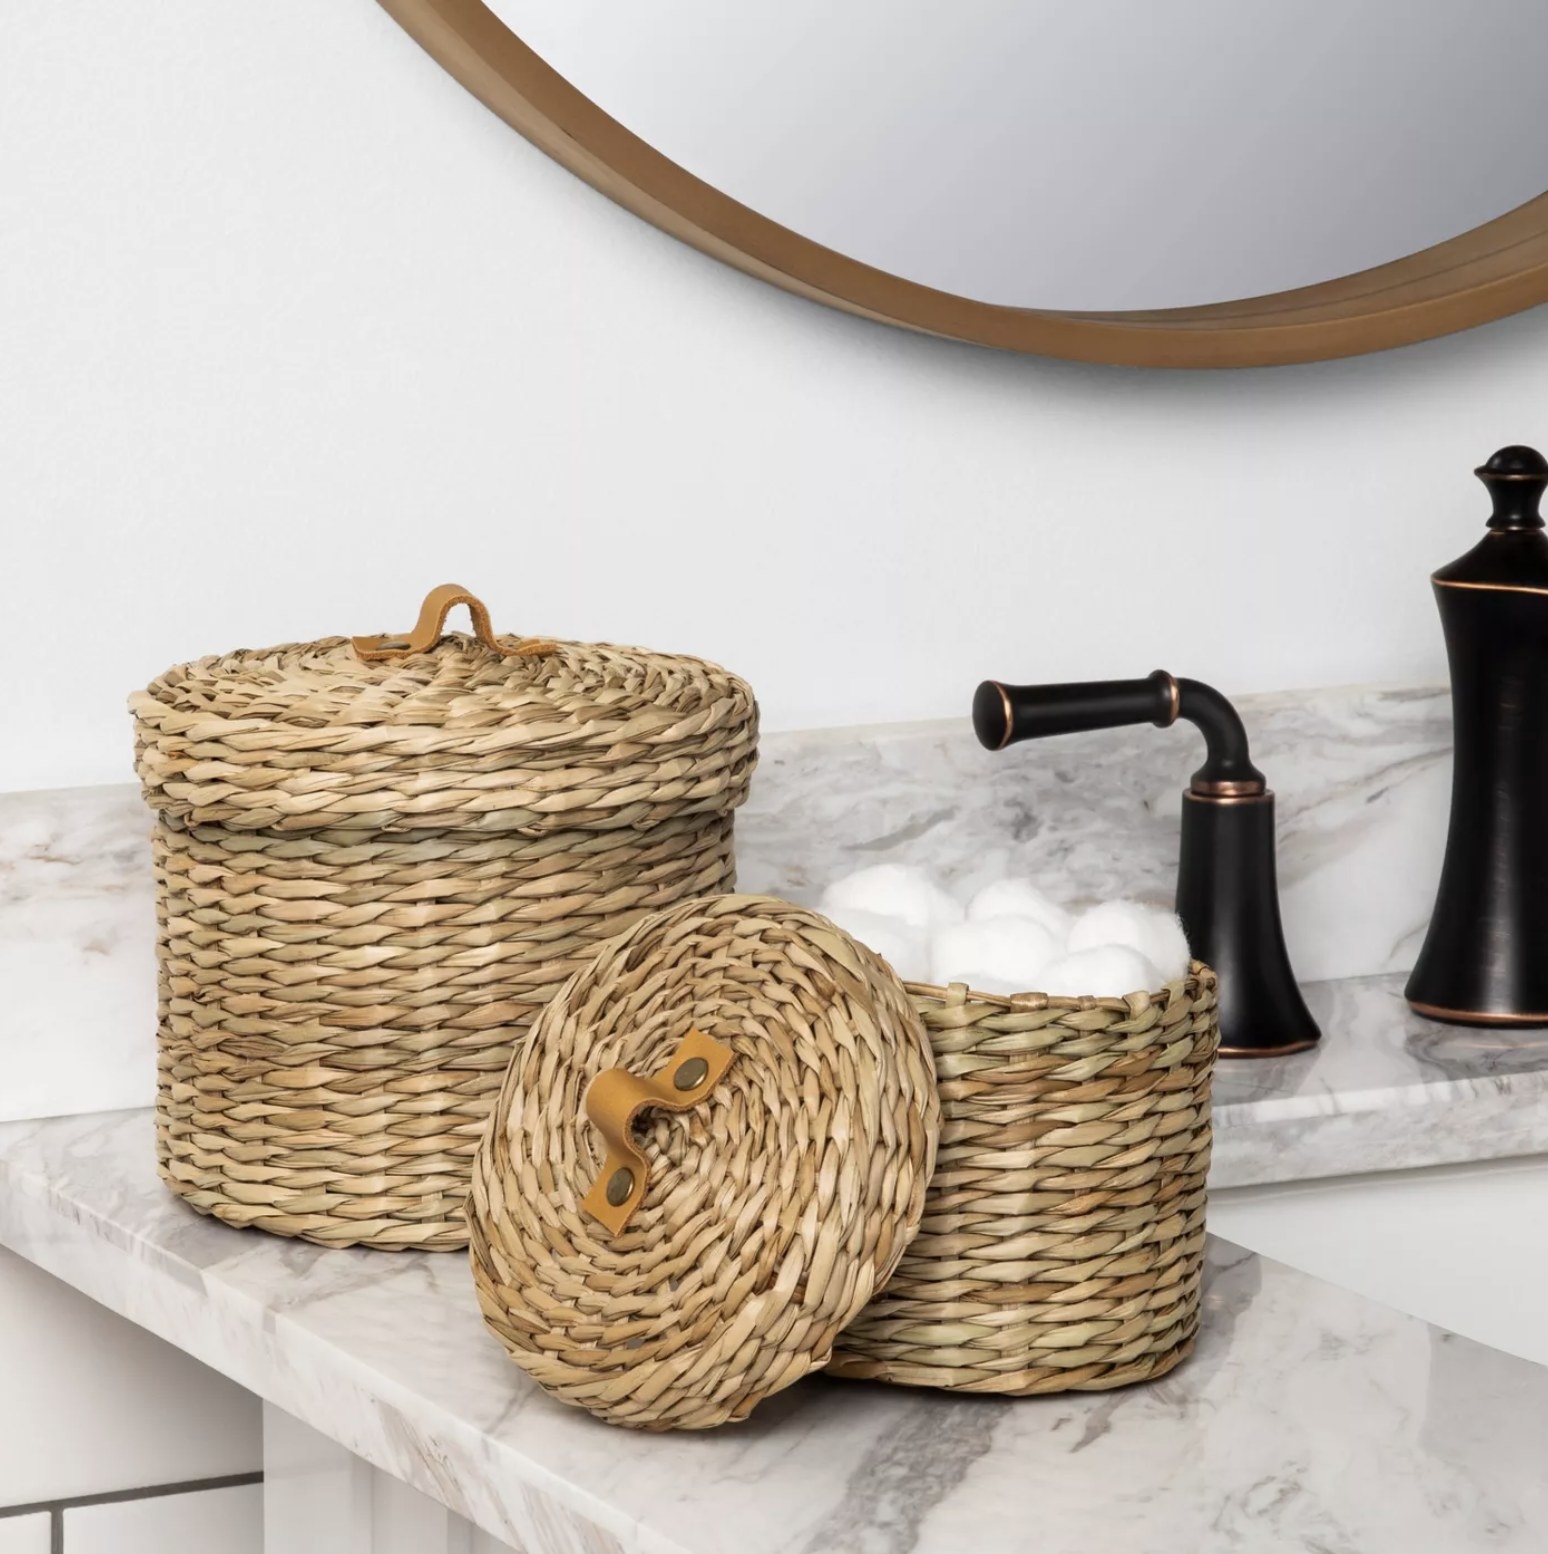 Two woven storage canisters on a bathroom sink